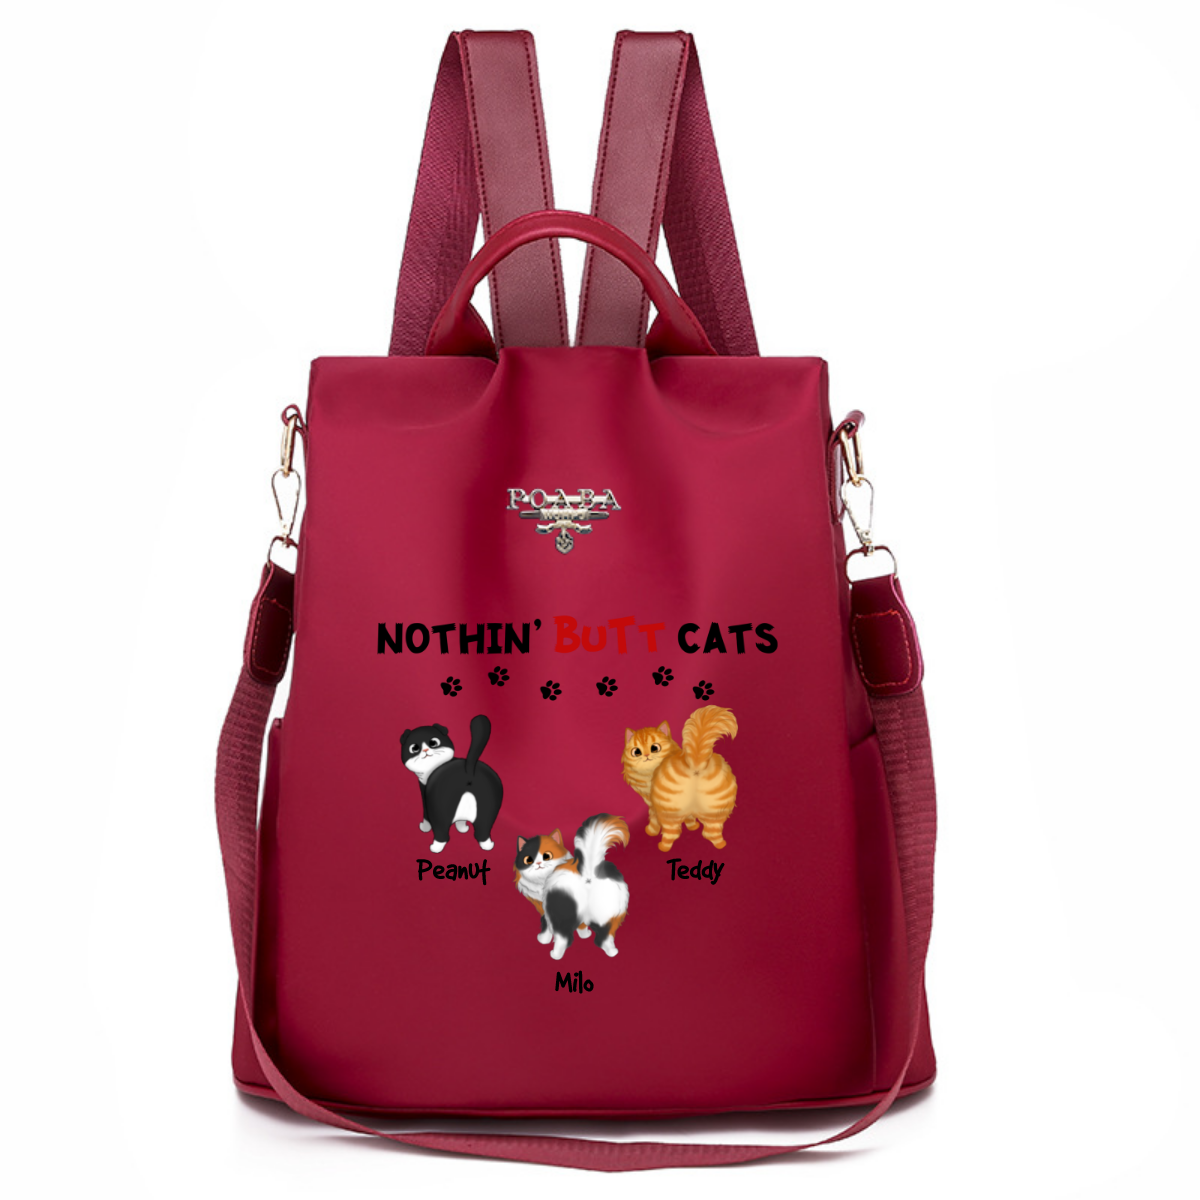 Nothing Butt Cats Fluffy Cat Personalized Backpack